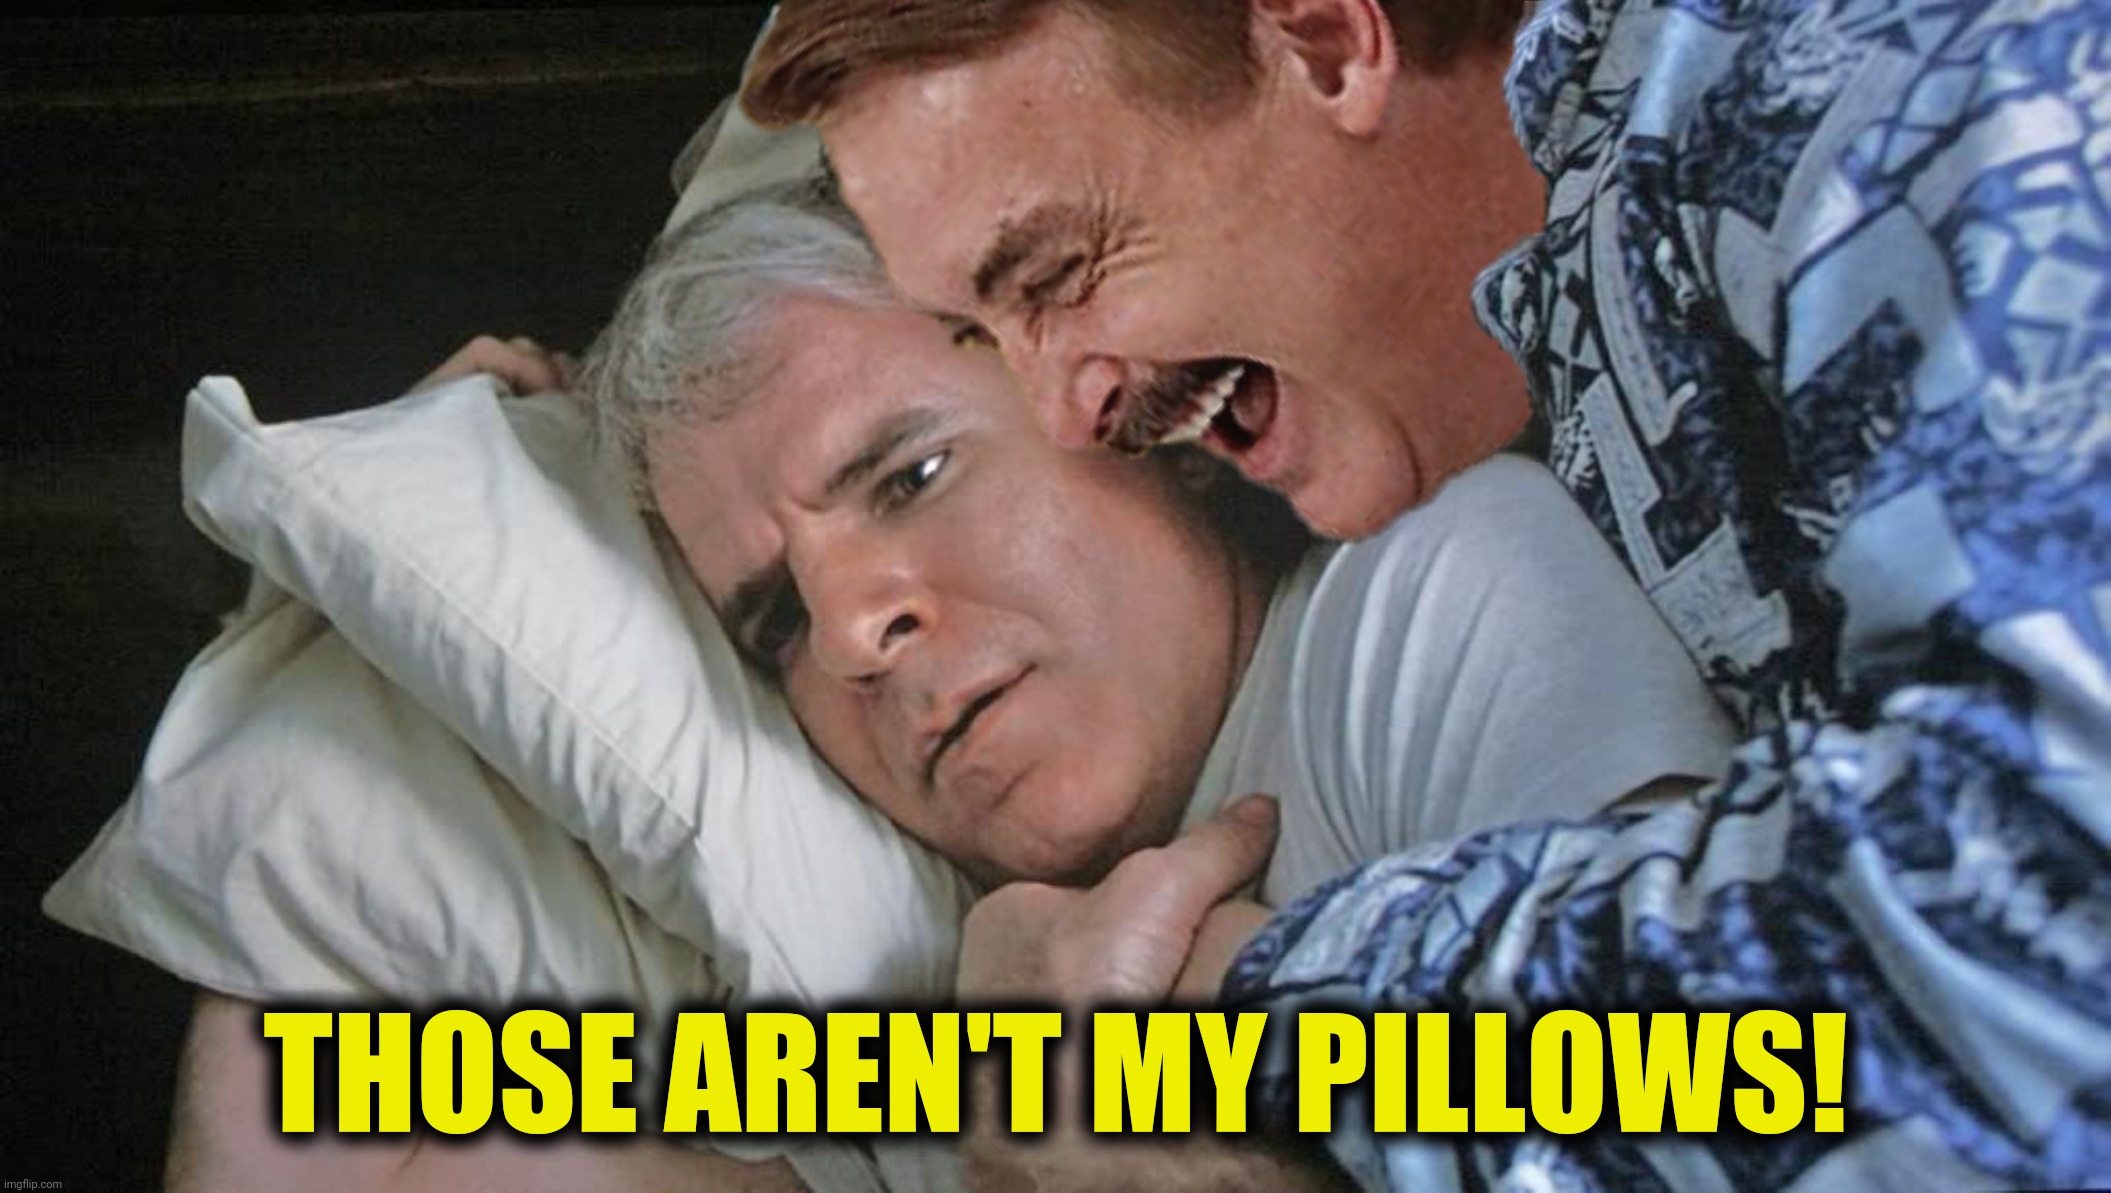 Bad Photoshop Sunday presents:  Between The Giza Dream Sheets | THOSE AREN'T MY PILLOWS! | image tagged in bad photoshop sunday,mike lindell,planes trains and automobiles,those aren't pillows,my pillows | made w/ Imgflip meme maker